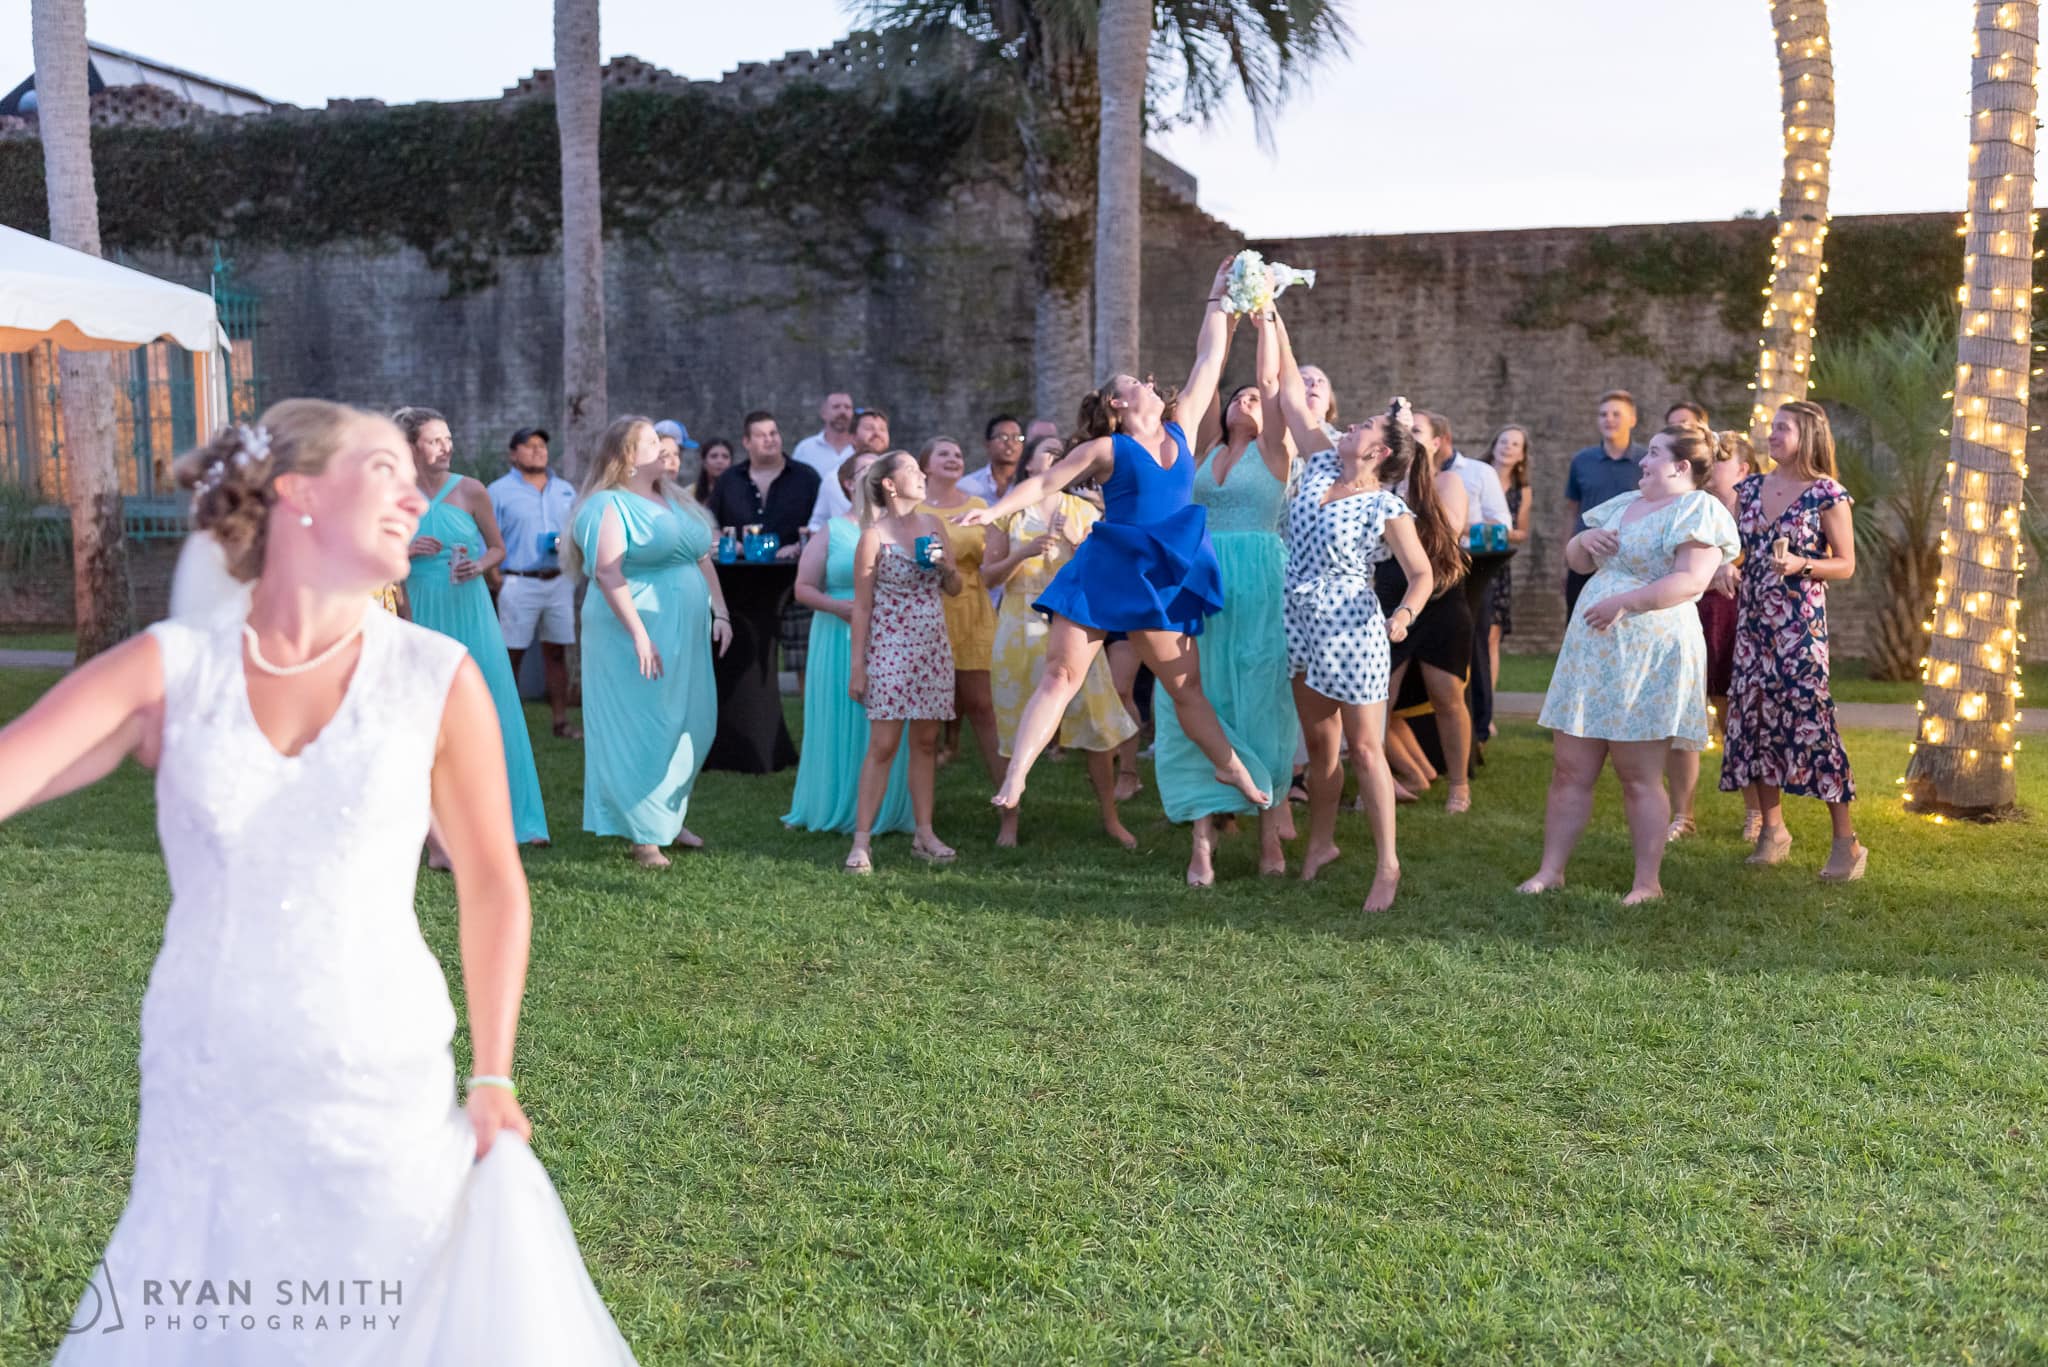 Bridesmaids fighting for the bouquet  - Atalaya Castle - Huntington Beach State Park